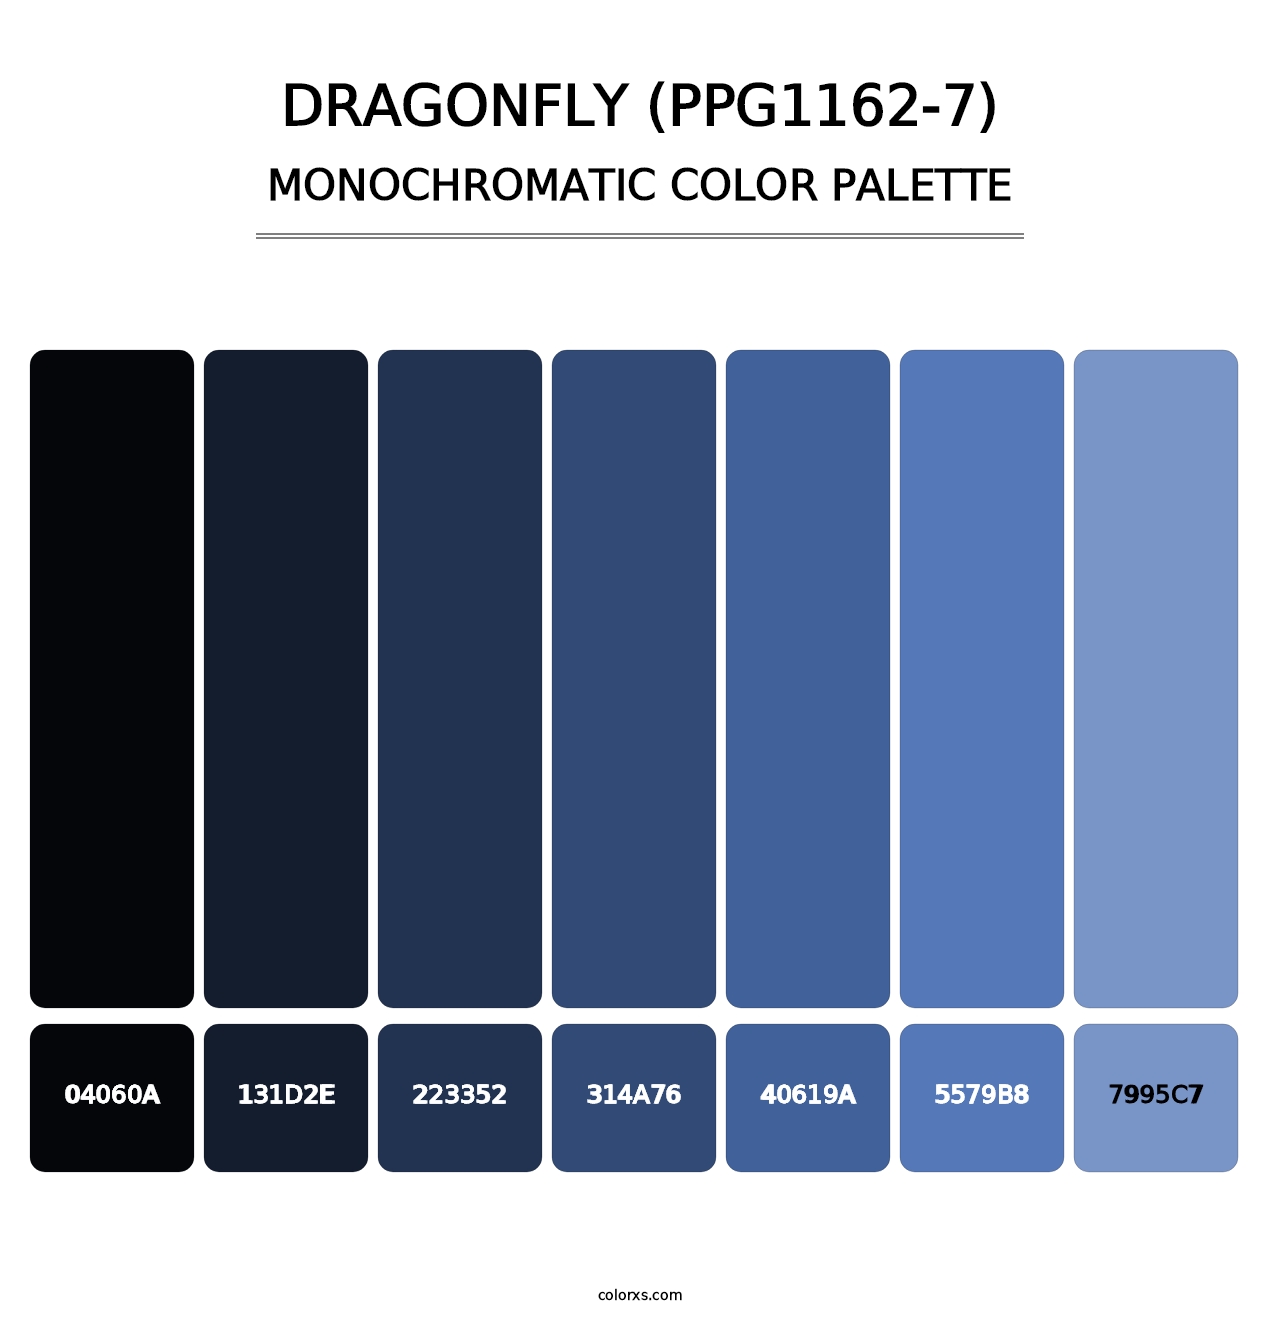 Dragonfly (PPG1162-7) - Monochromatic Color Palette